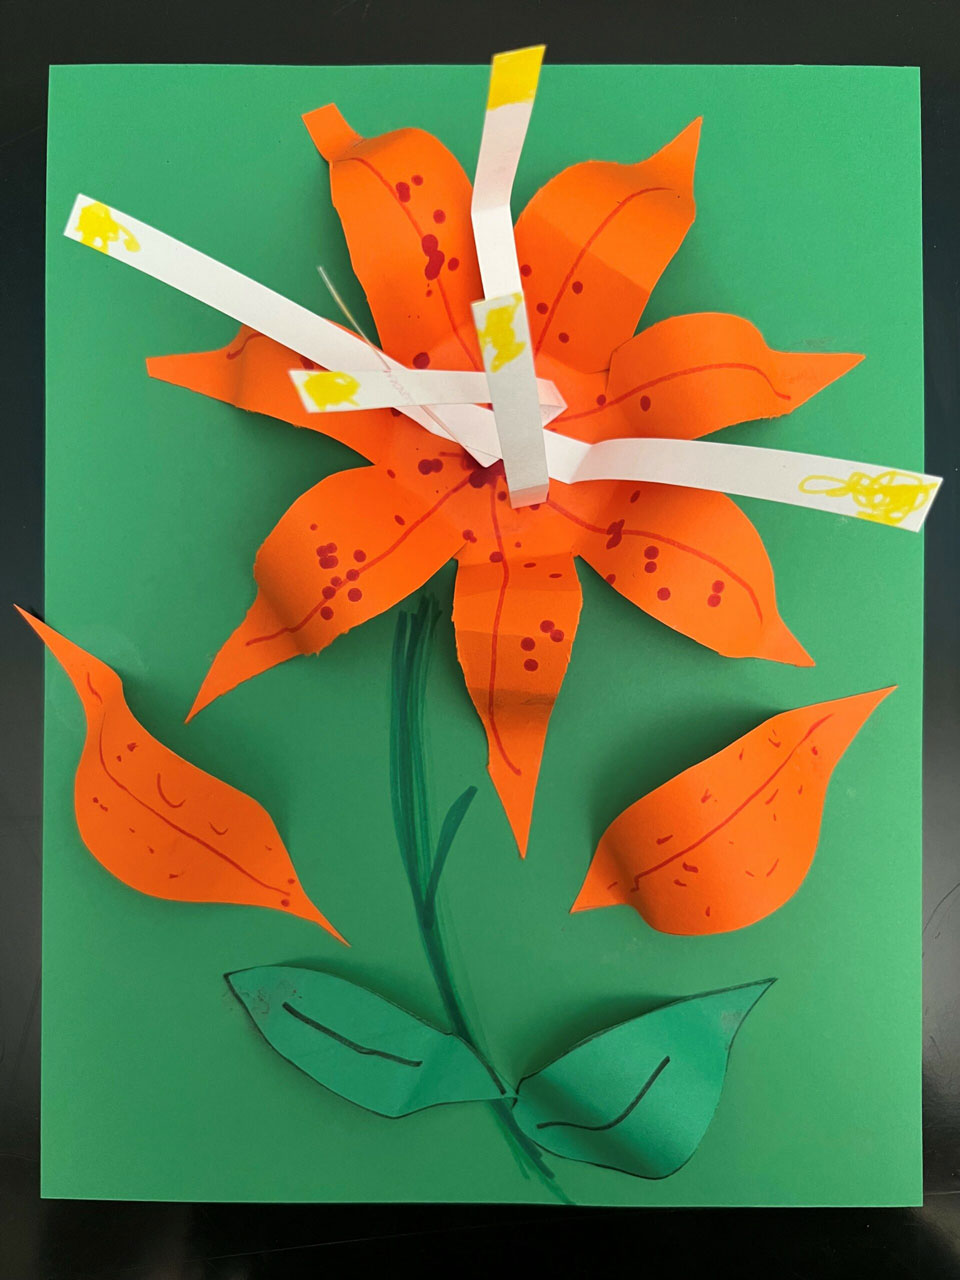 An orange 3D paper lily flower on a green background.